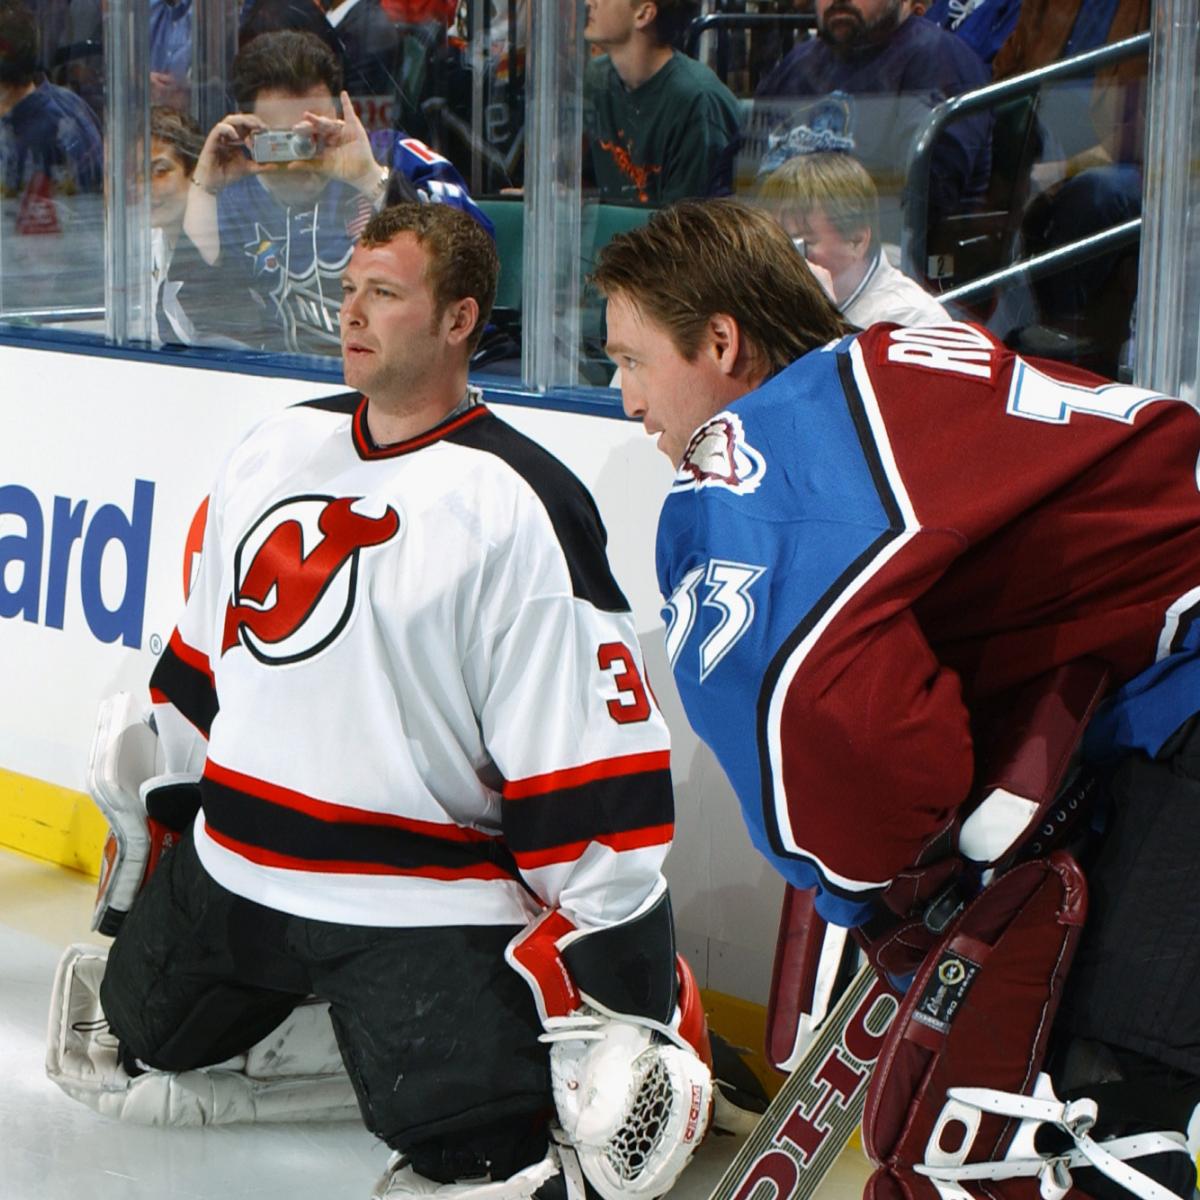 NHL Public Relations on X: The 2003 #NHLAllStar Game featured the two  winningest goaltenders in NHL history in Martin Brodeur and Patrick Roy,  the last of four showcase events in which both